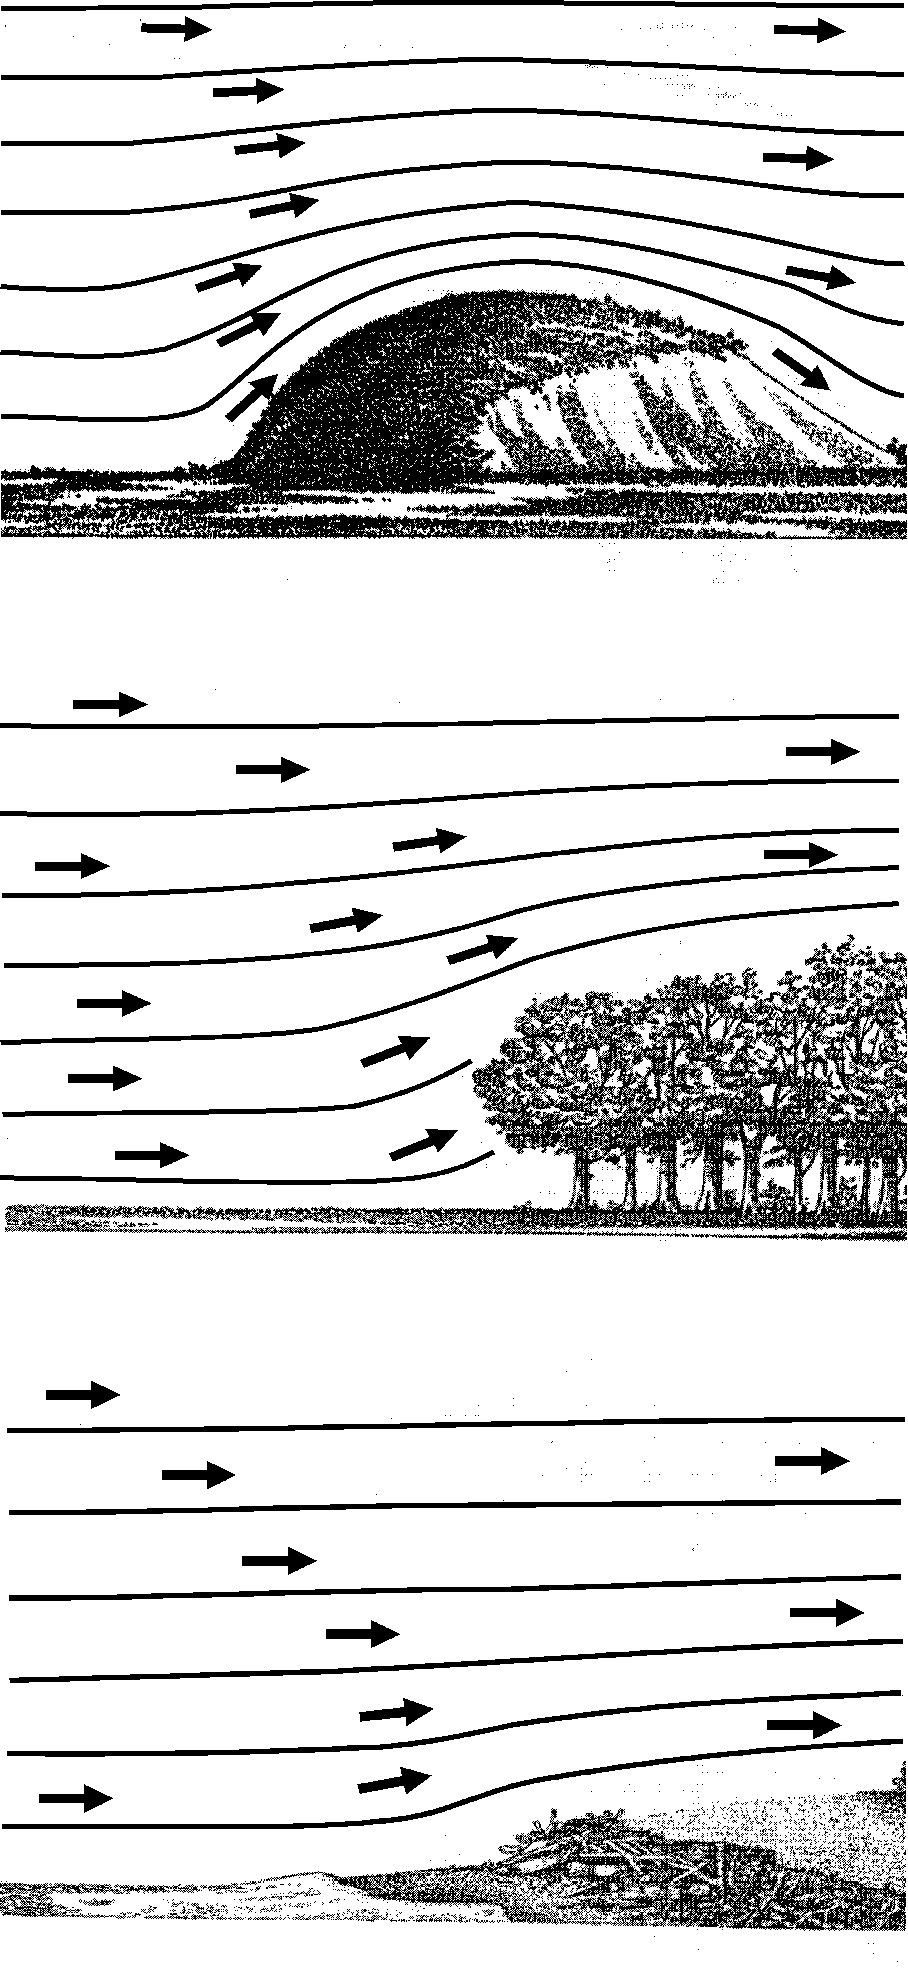 Flow of stable air over a hill, stand of trees, low beach